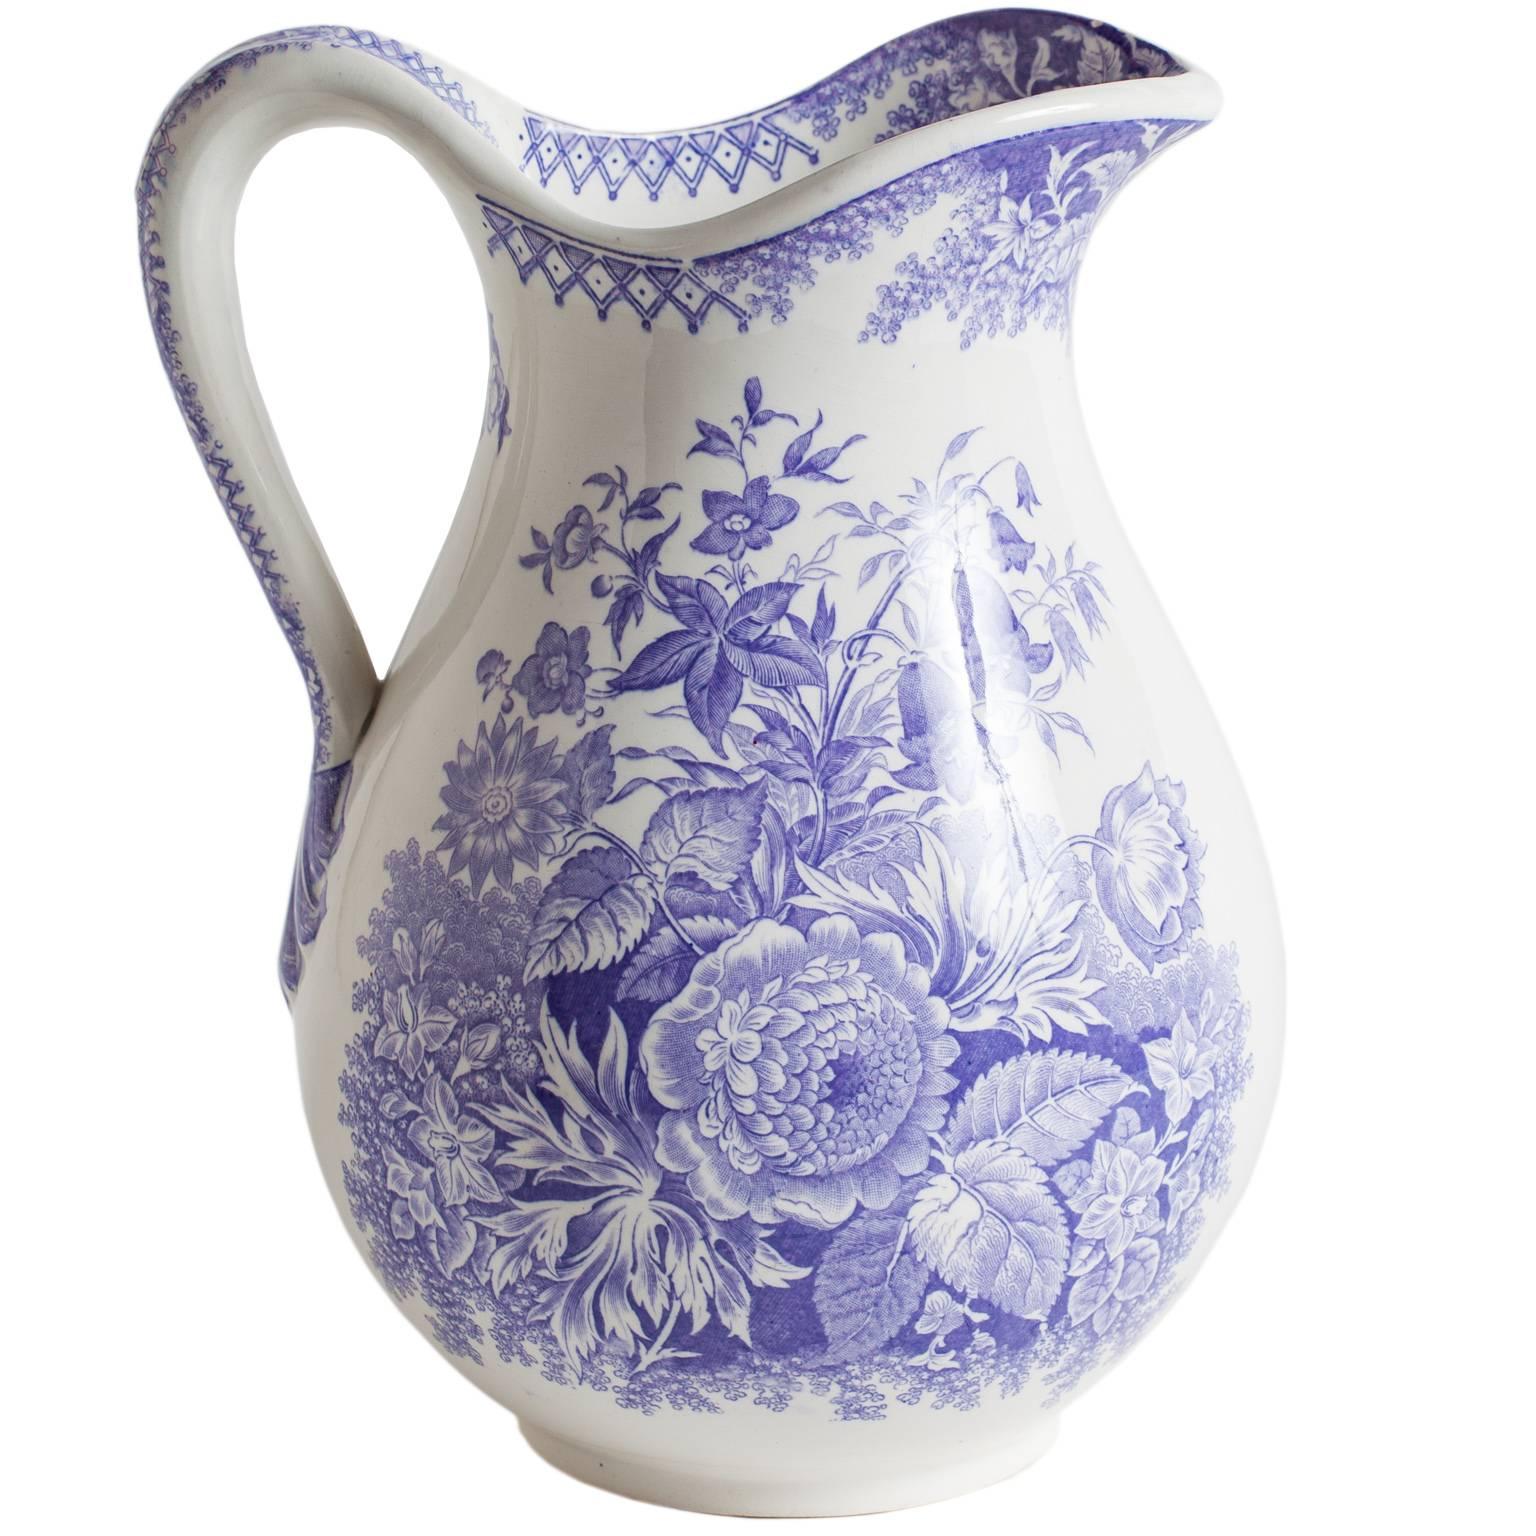 Antique French Ironstone Pitcher with Lavender Flowers, circa 1860 For Sale